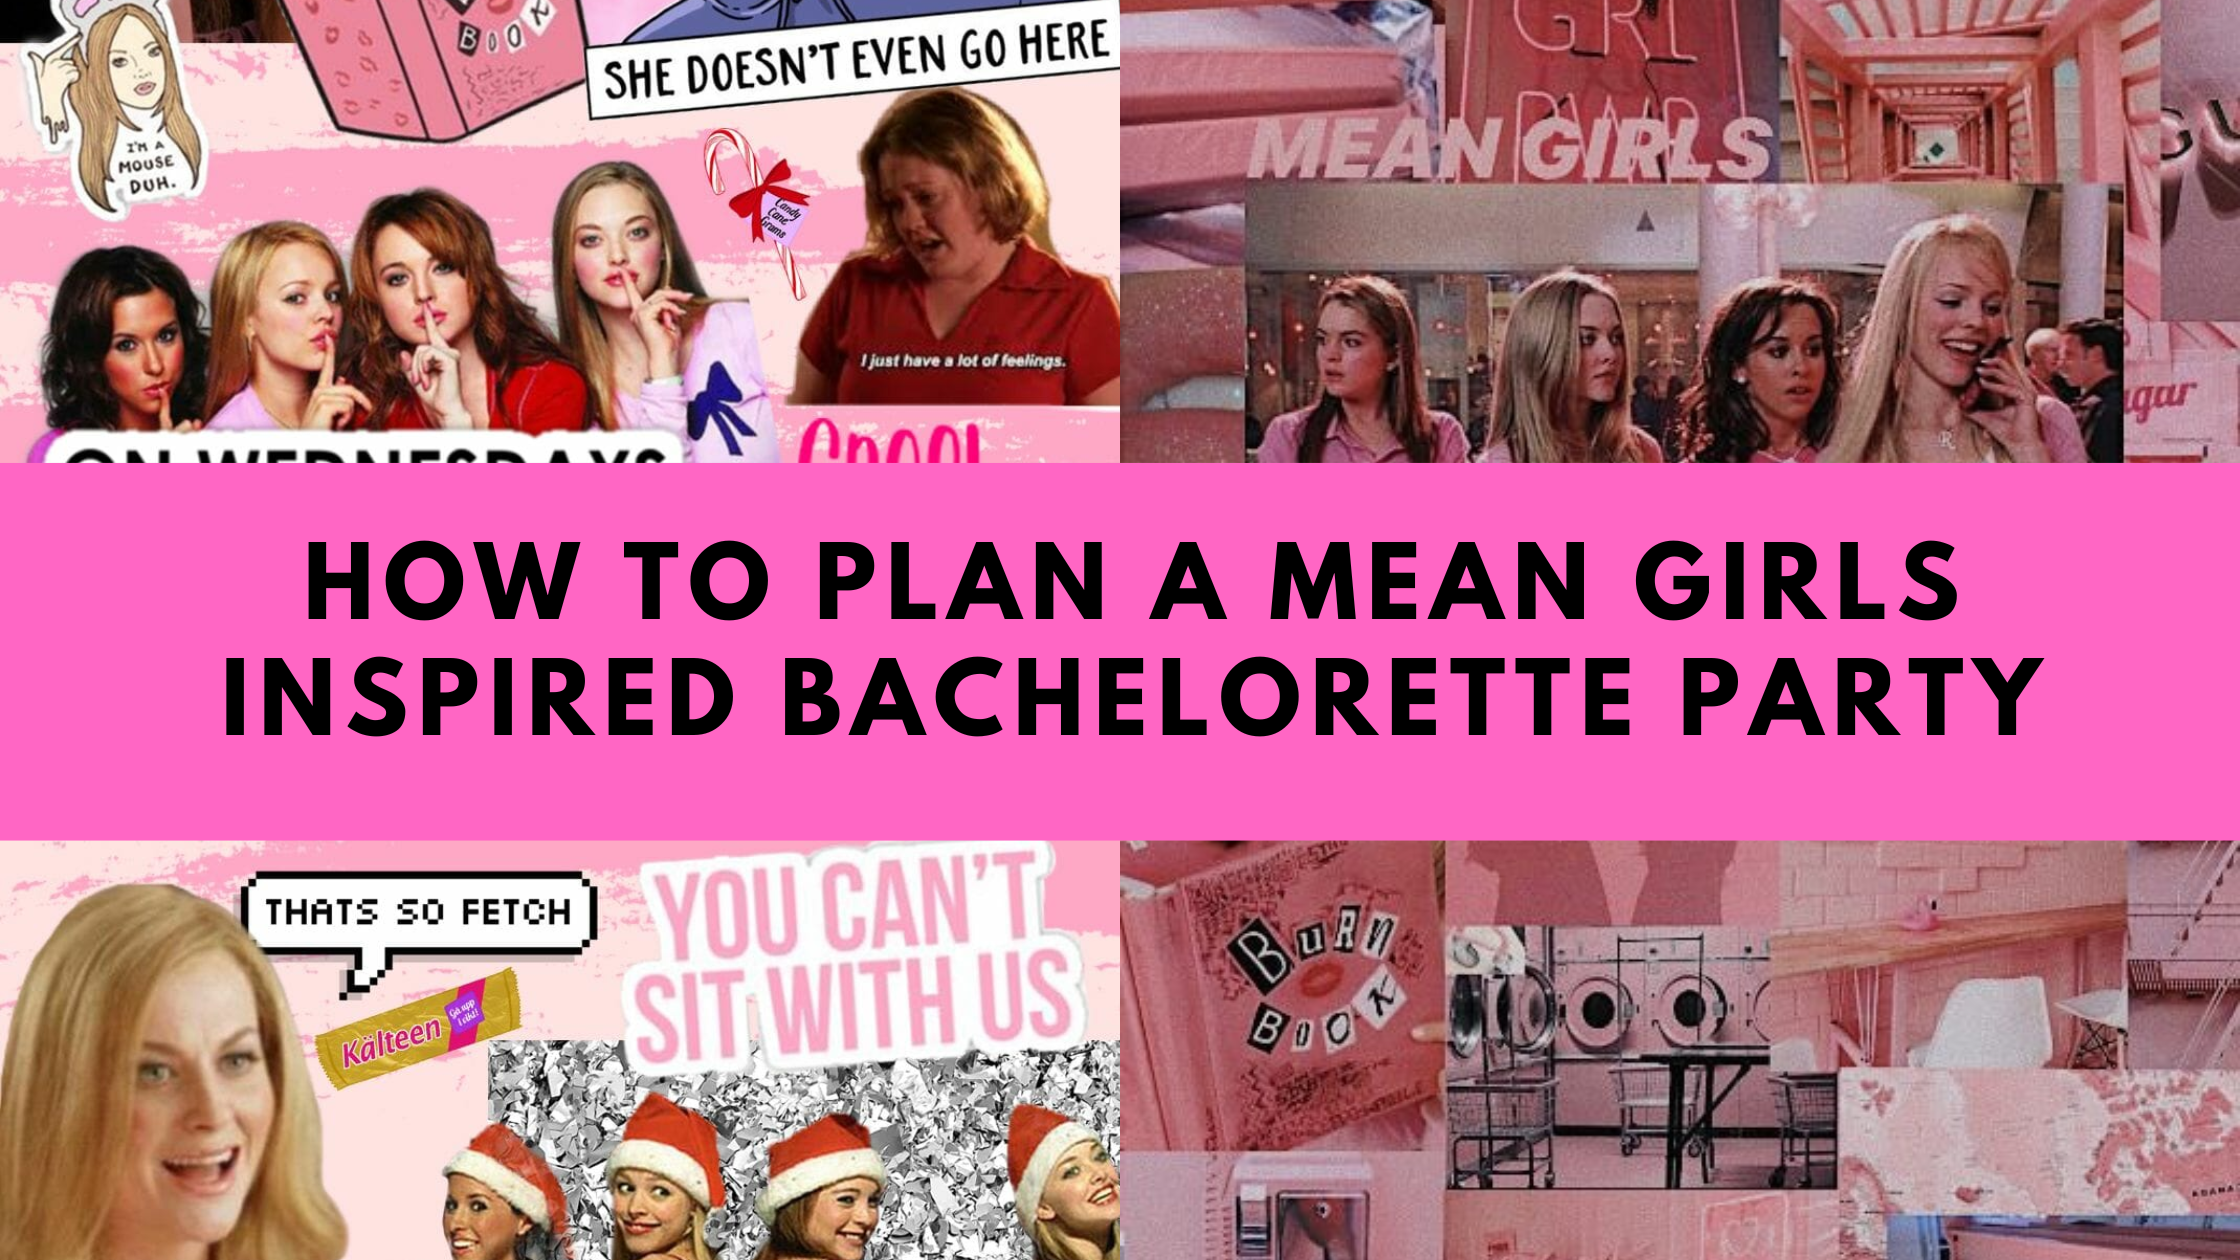 You Can't Sit With Us! How to throw a Mean Girls inspired hen party.